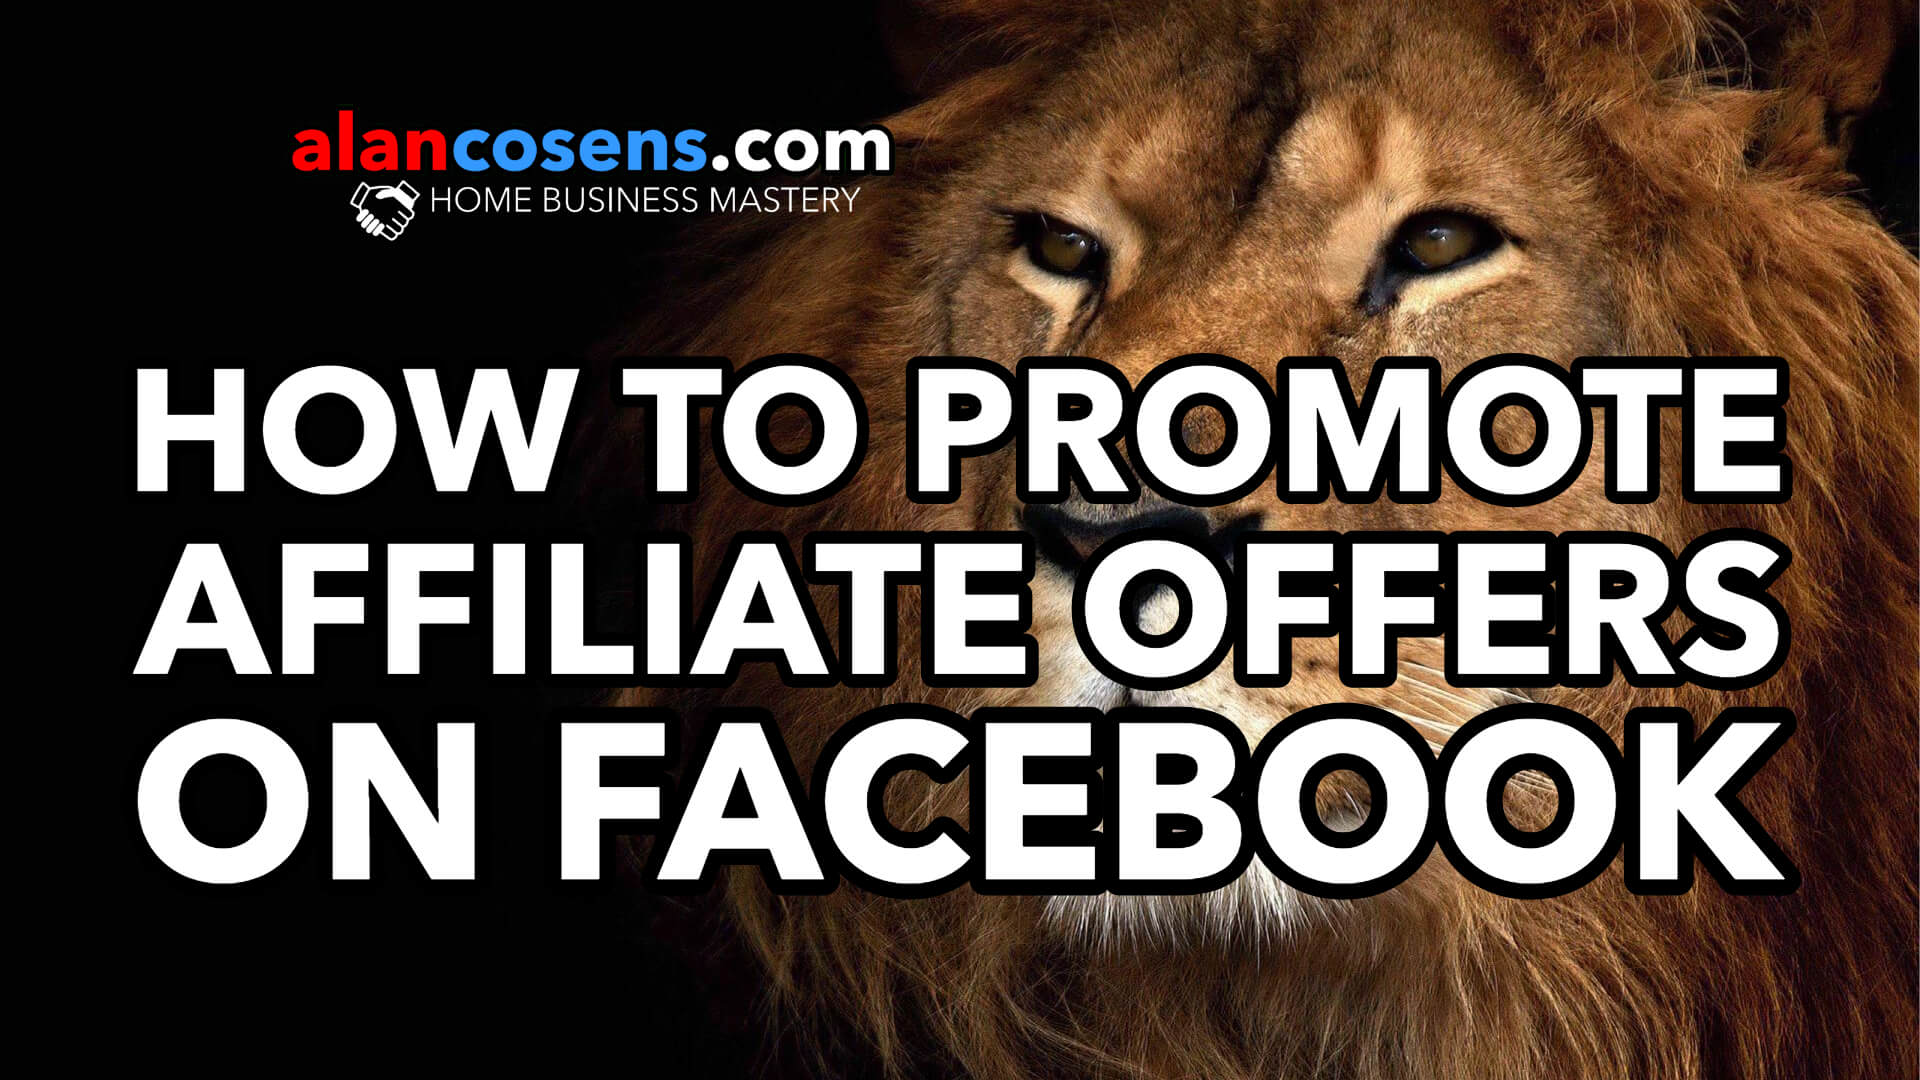 How To Promote Affiliate Offers On Facebook